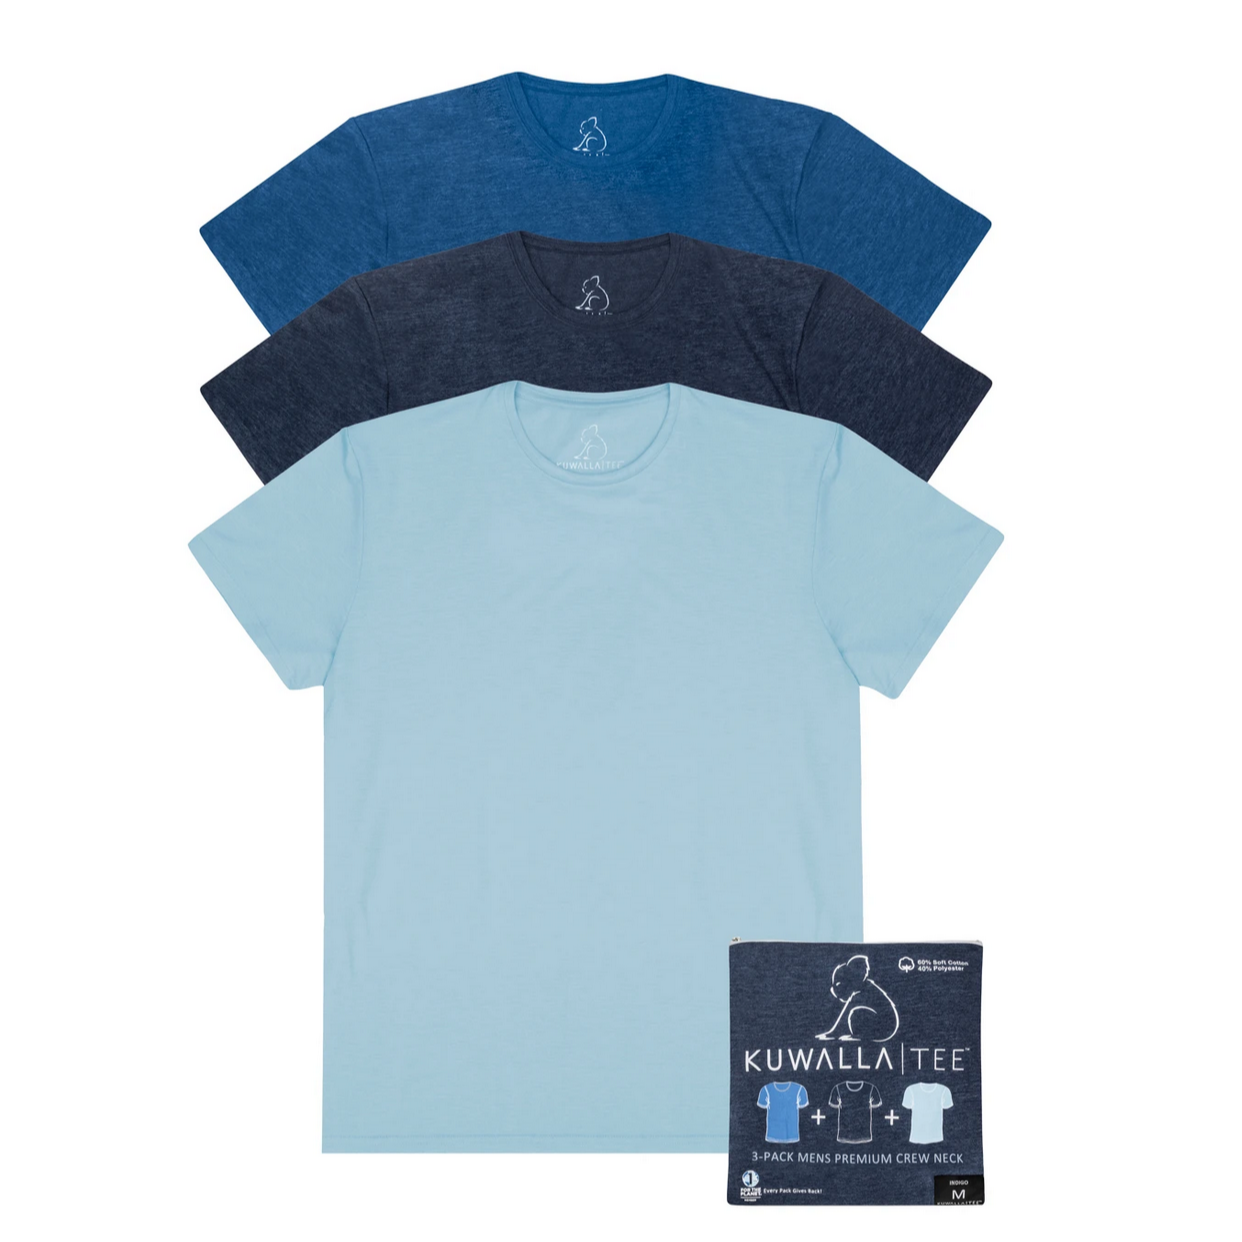 3 Pack Crew Neck, Shades of Blue